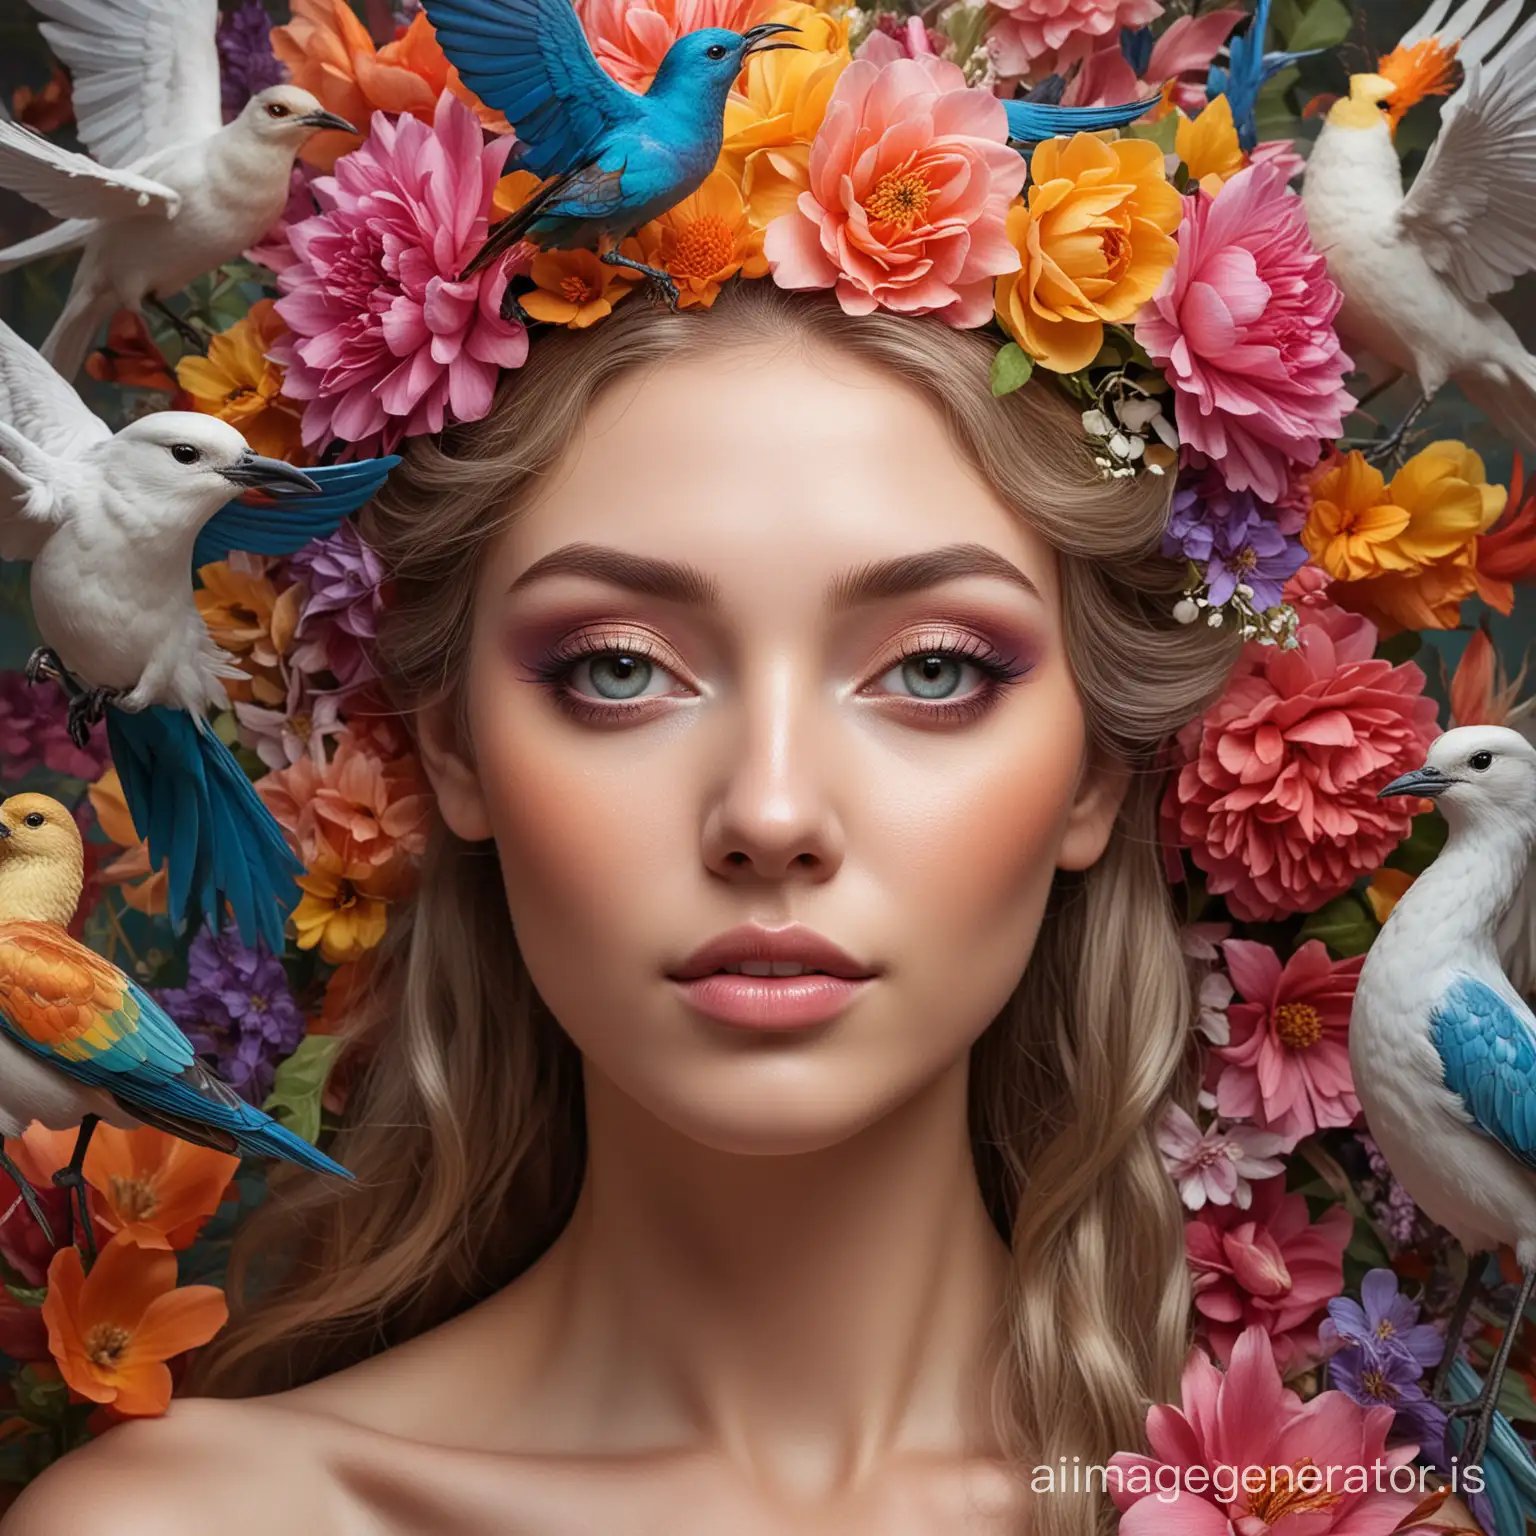 a closeup portrait of a goddess like women who looks like a flower nymph and has different huge colourful flowers and birds around her